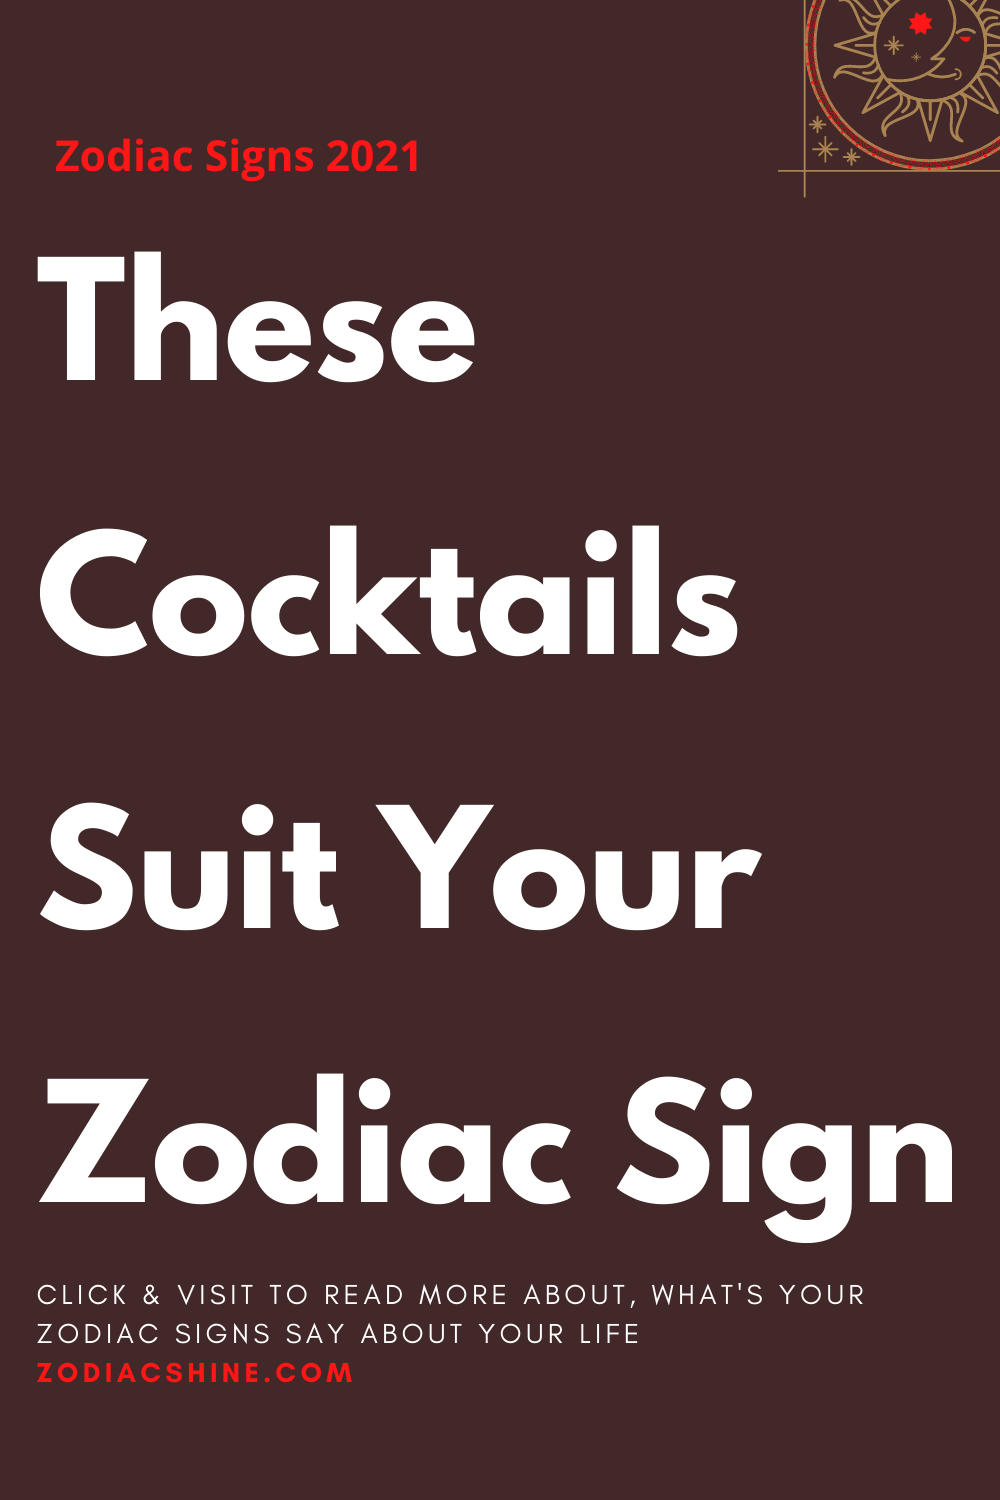 These Cocktails Suit Your Zodiac Sign